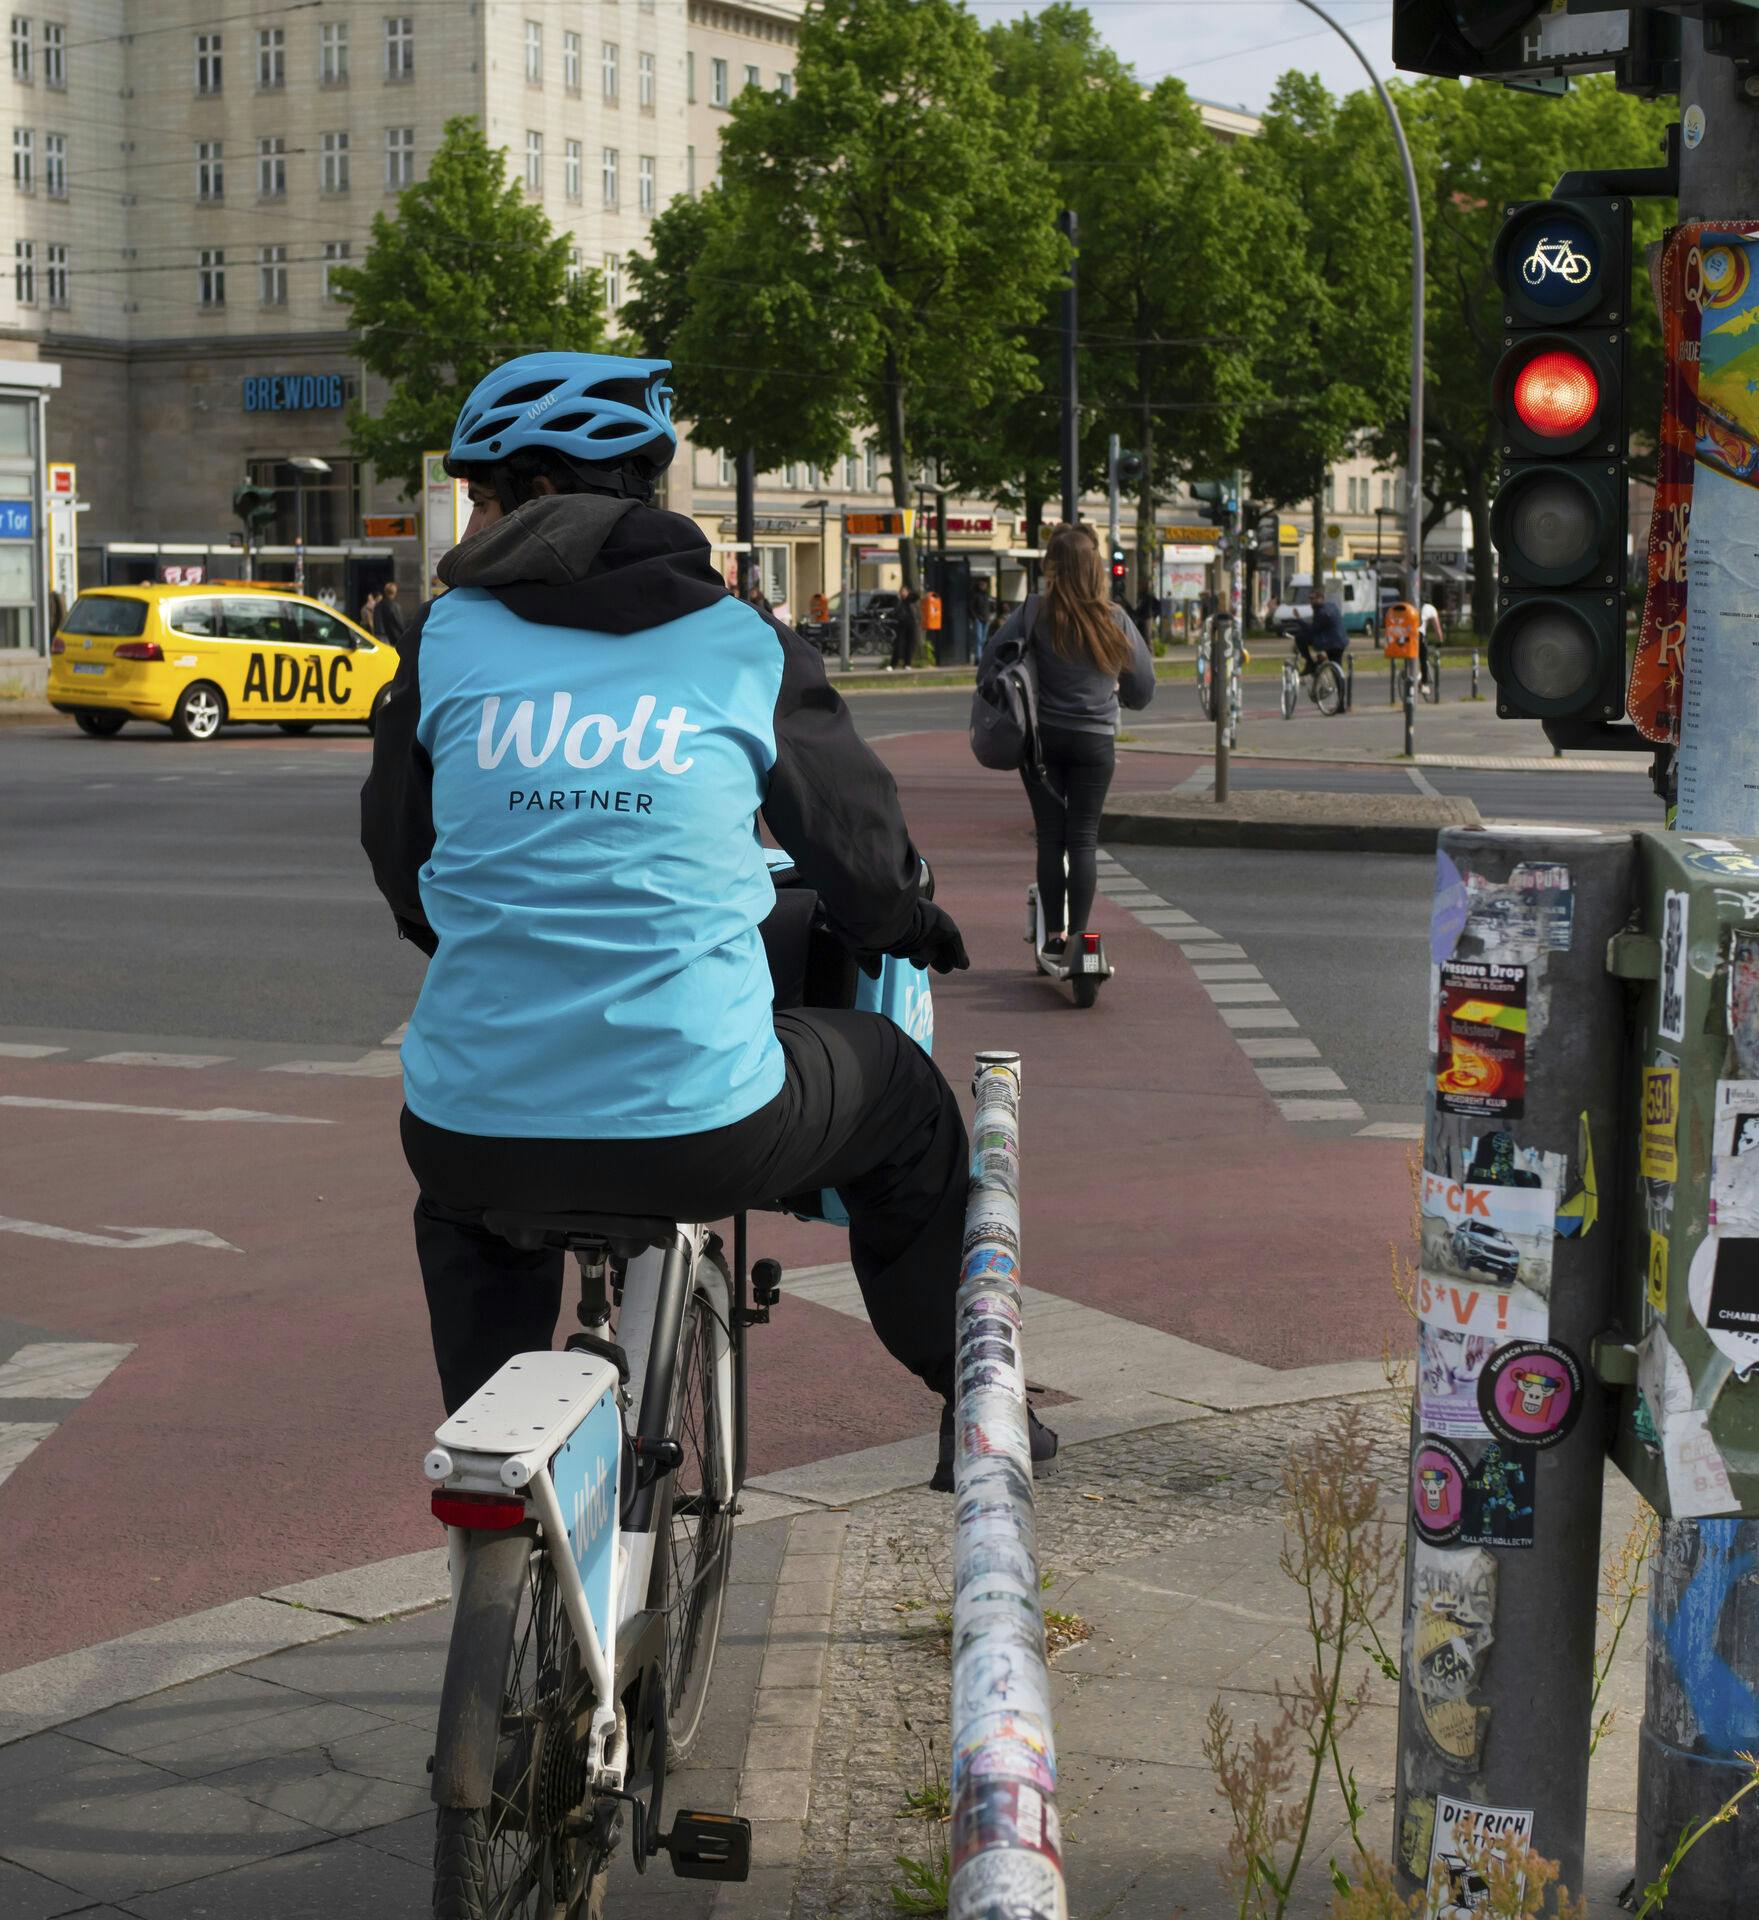 18 May 2023, Berlin: 18.05.2023, Berlin. A messenger from the delivery service Wolt stands with his bicycle in front of a red light in the Friedrichshain district. Wolt is a company from Finland. Photo by: Wolfram Steinberg/picture-alliance/dpa/AP Images